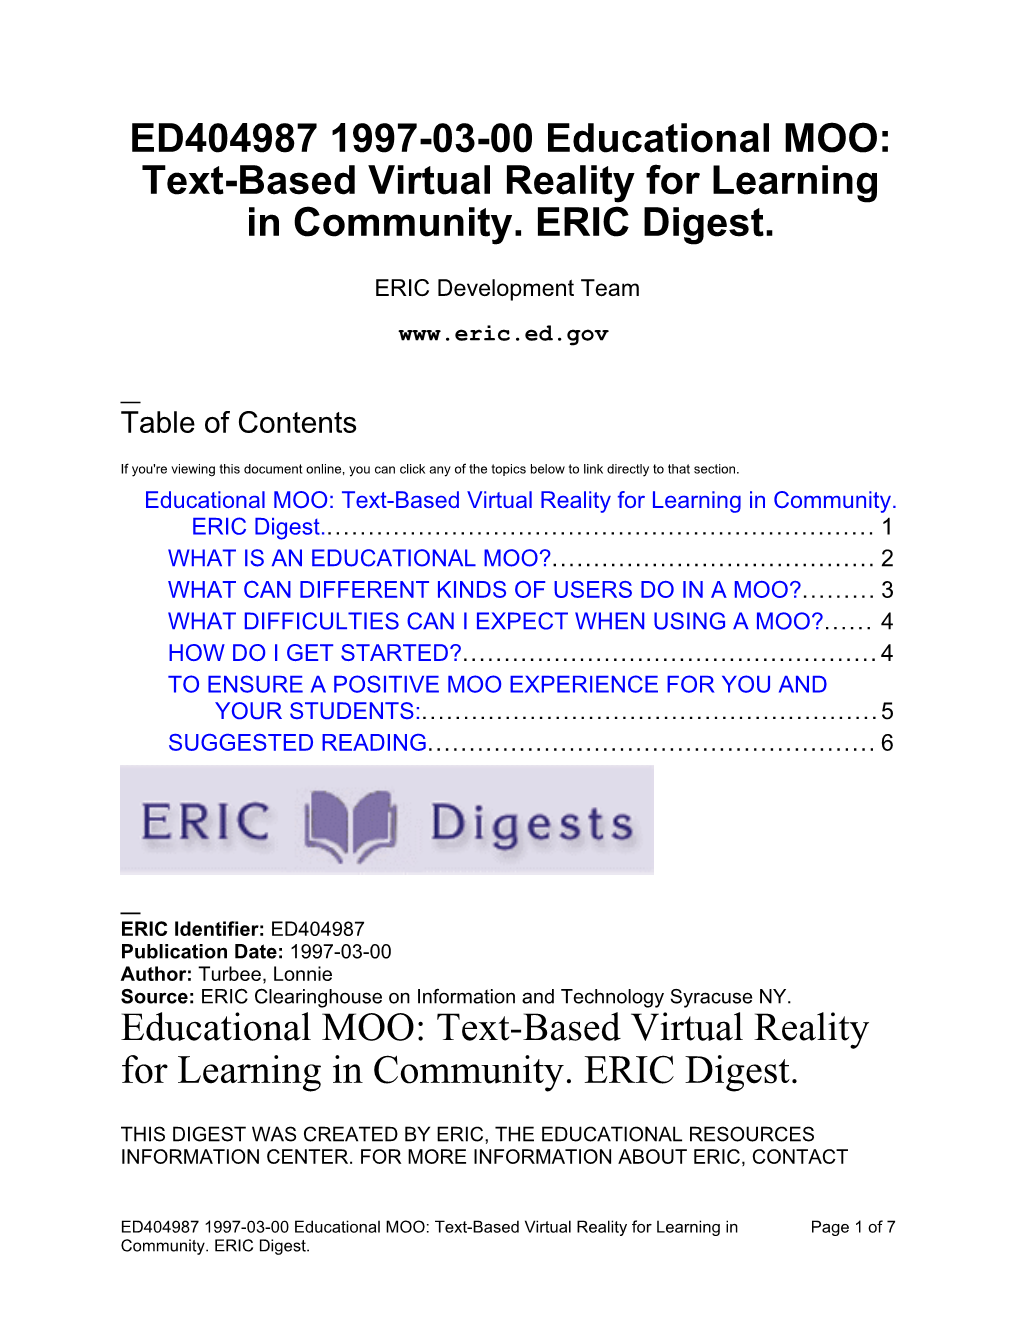 Text-Based Virtual Reality for Learning in Community